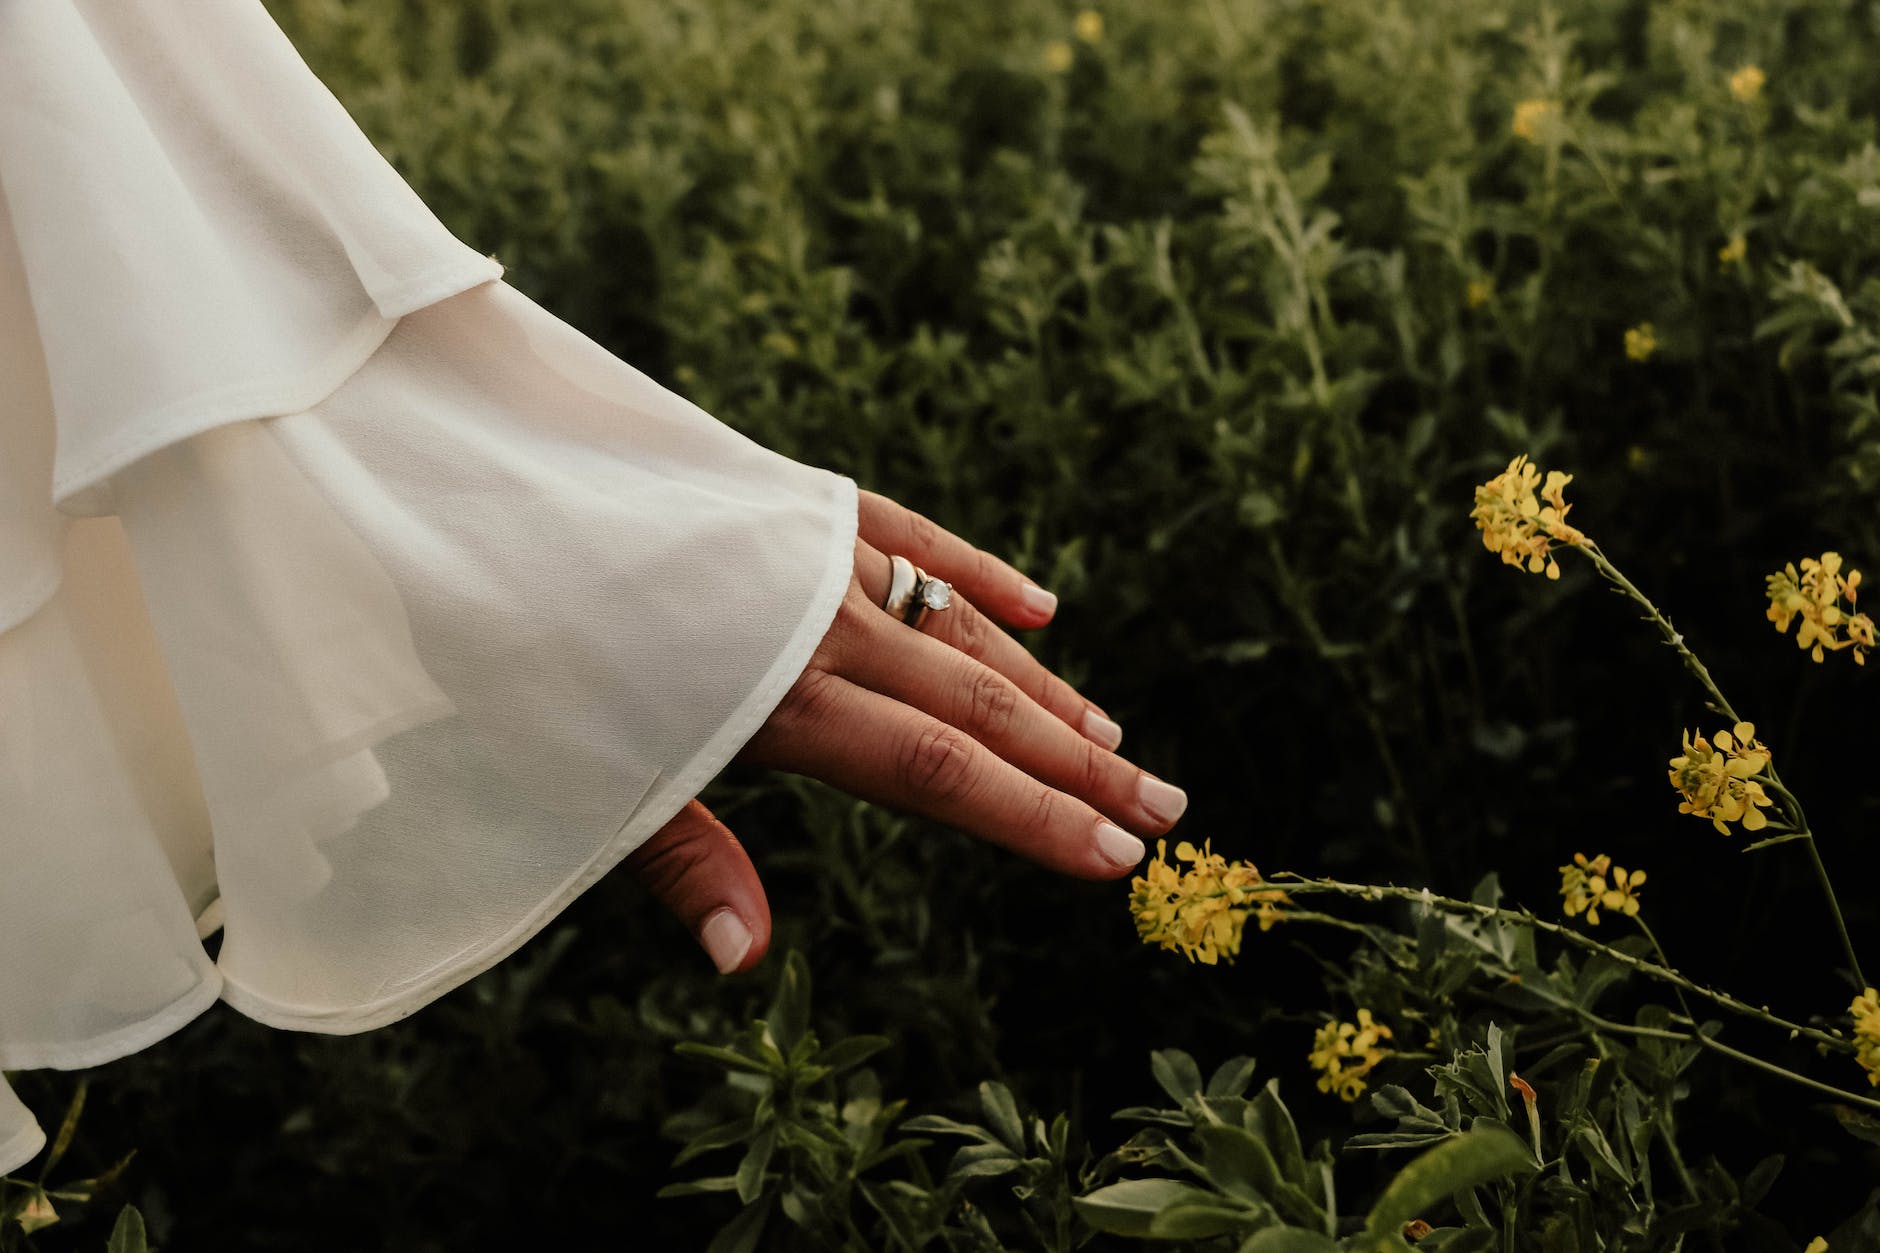 Photo by NUR DOĞAN on <a href="https://www.pexels.com/photo/a-woman-s-hand-in-a-field-of-yellow-flowers-16991296/" rel="nofollow">Pexels.com</a>